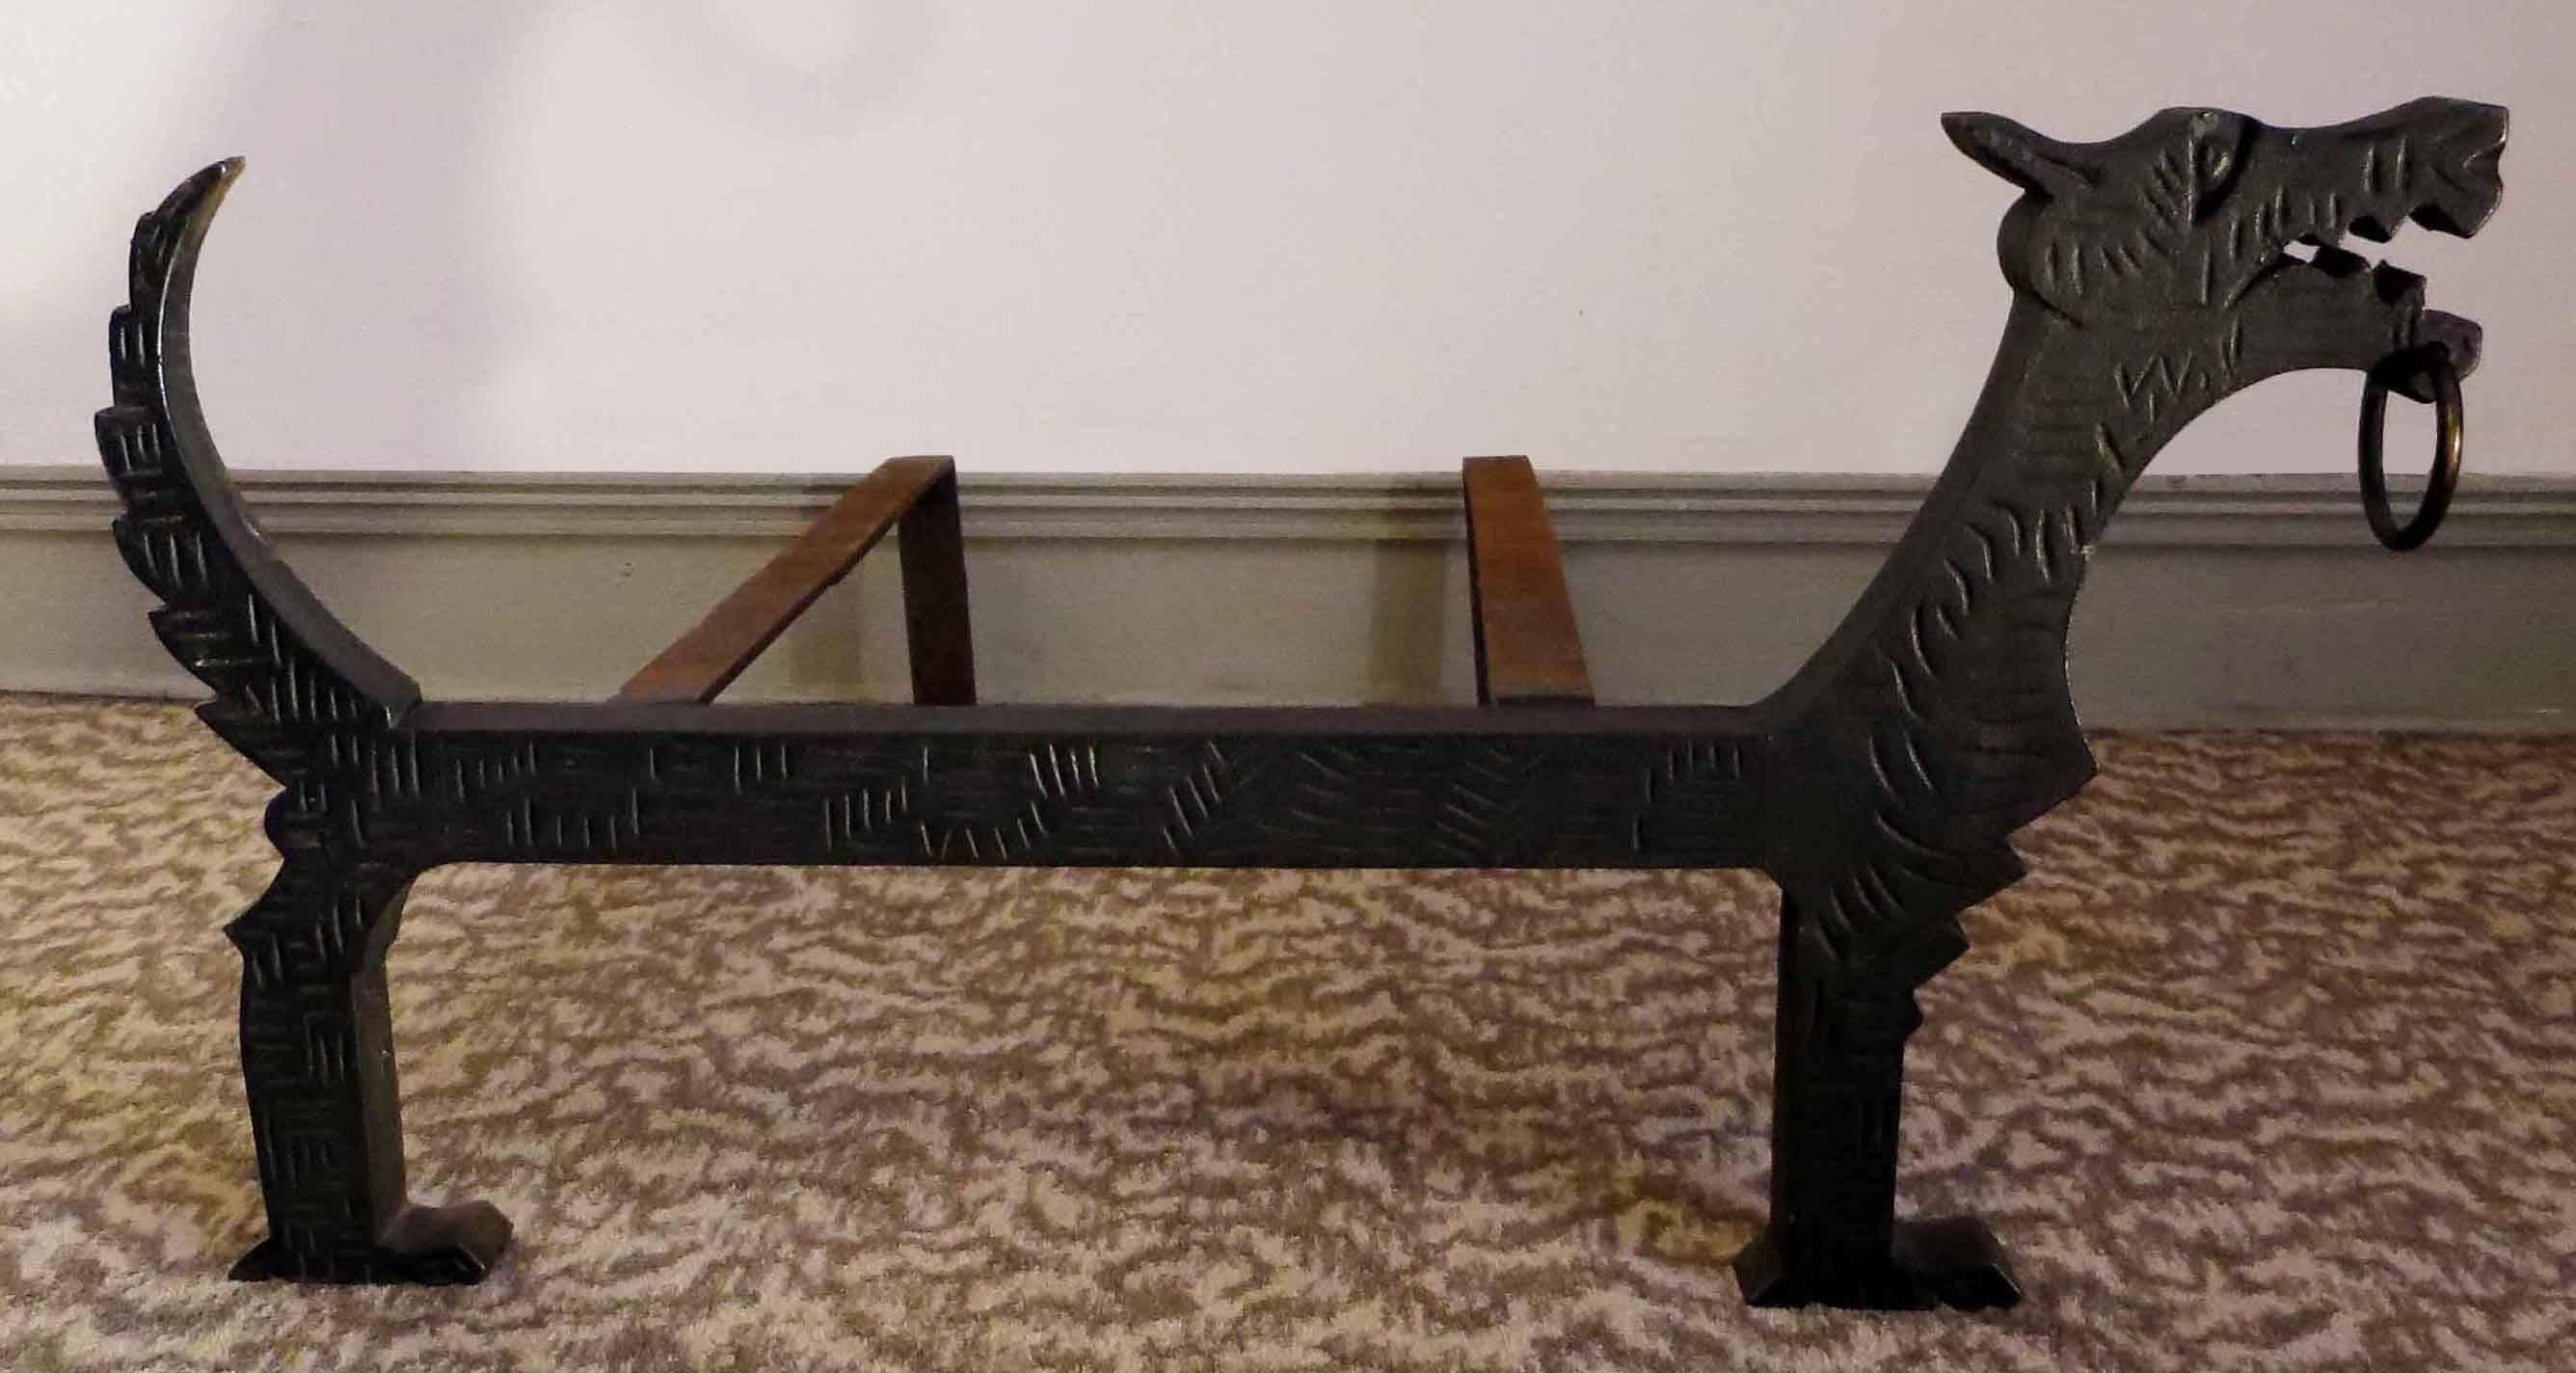 Decorative andiron looking as a dog with a brass ring in mouth.
Cast iron is carved with geometrical design recalling the dog fur.